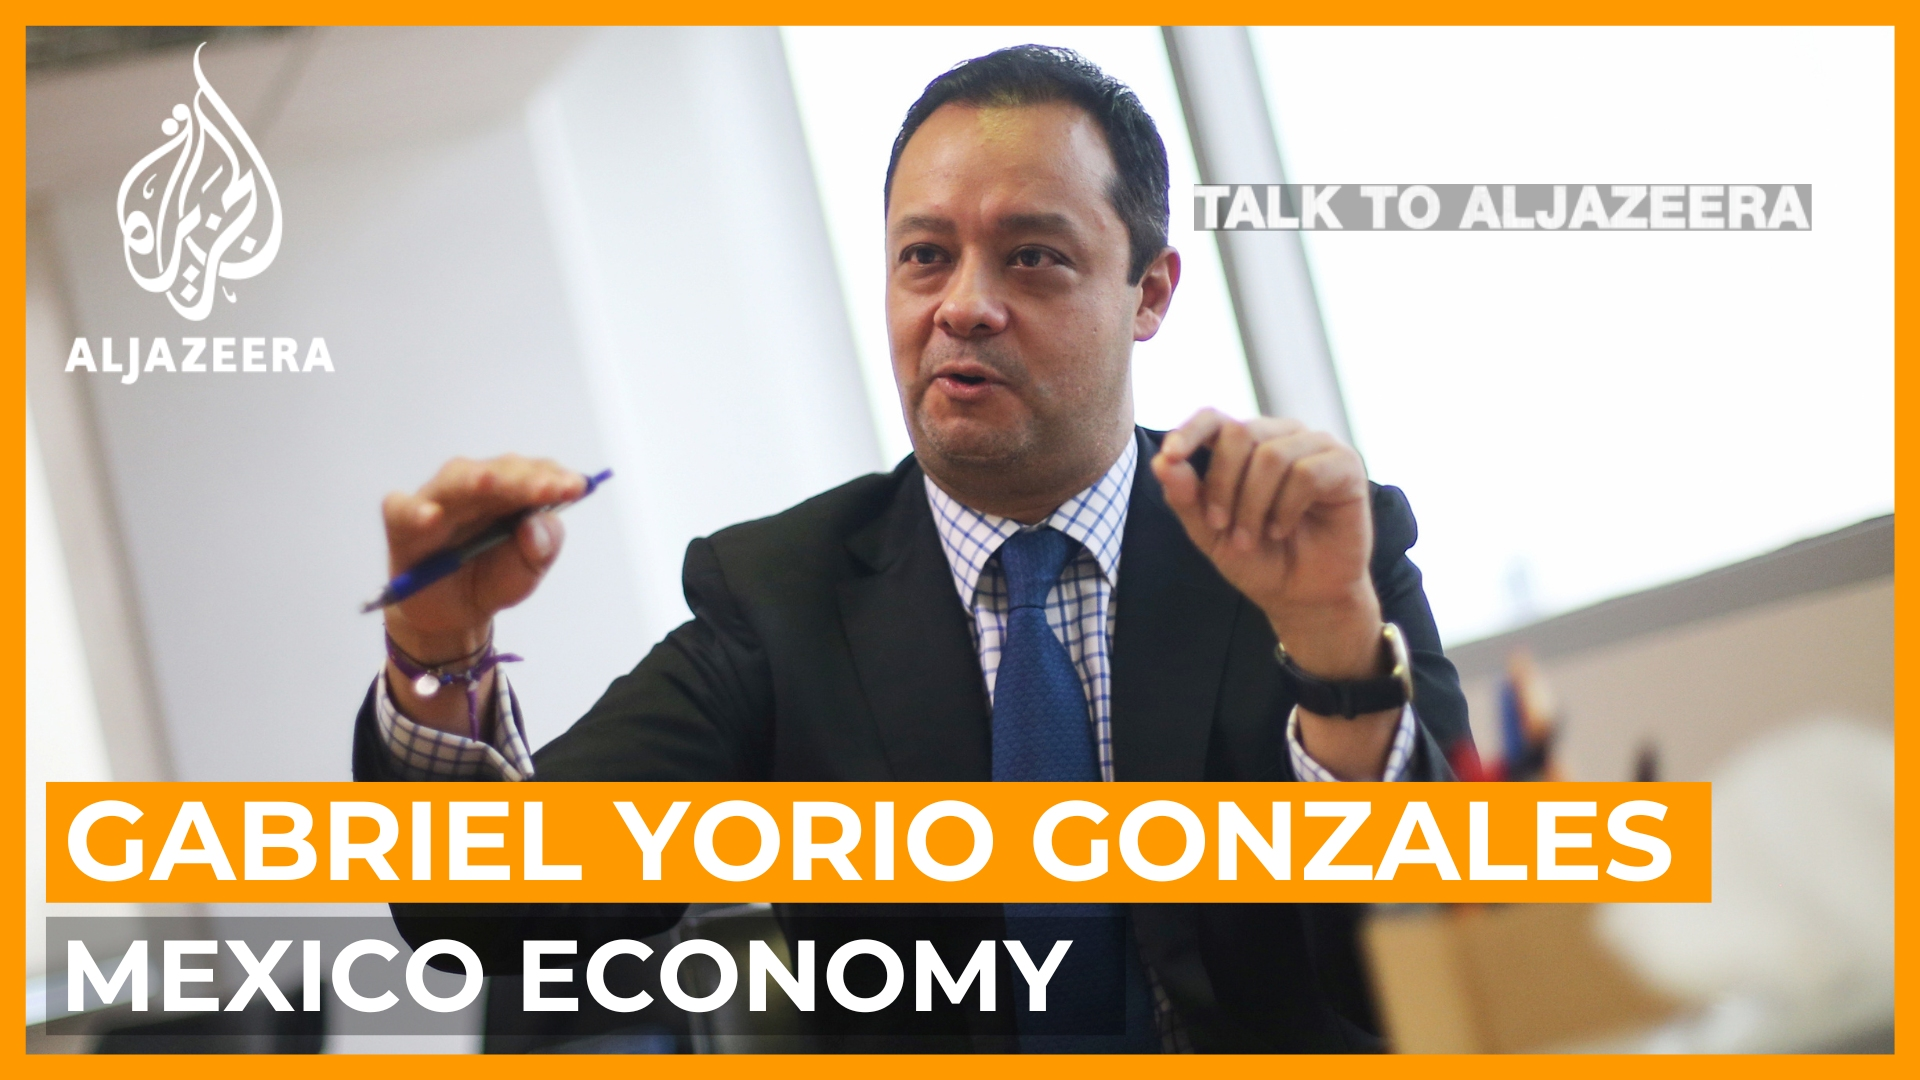 Mexico's deputy finance minister: Can inequality be reduced? | Talk to Al Jazeera